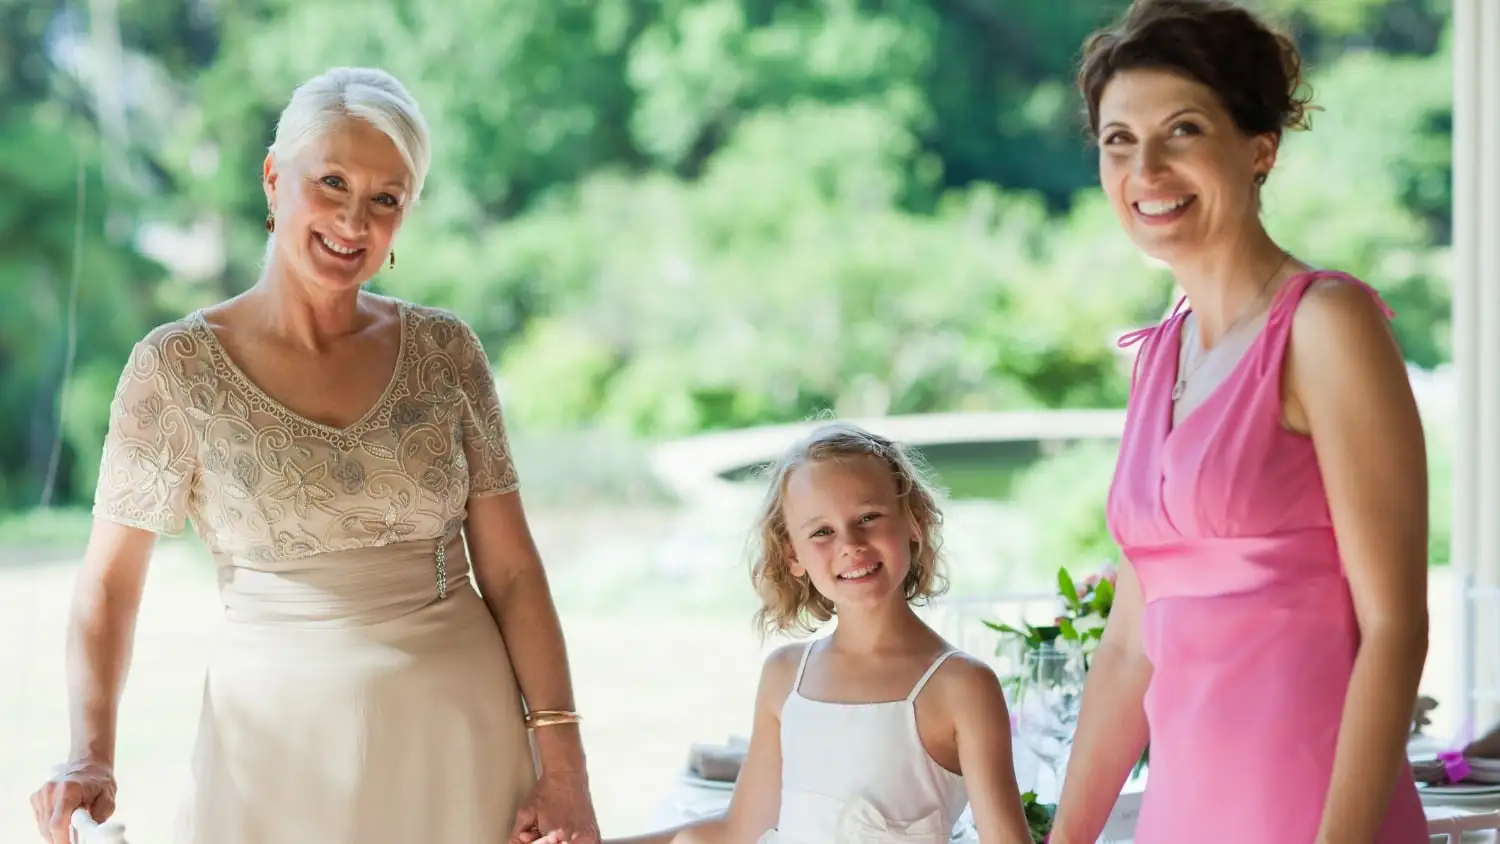 What Should Women Over 50 Wear to a Wedding?